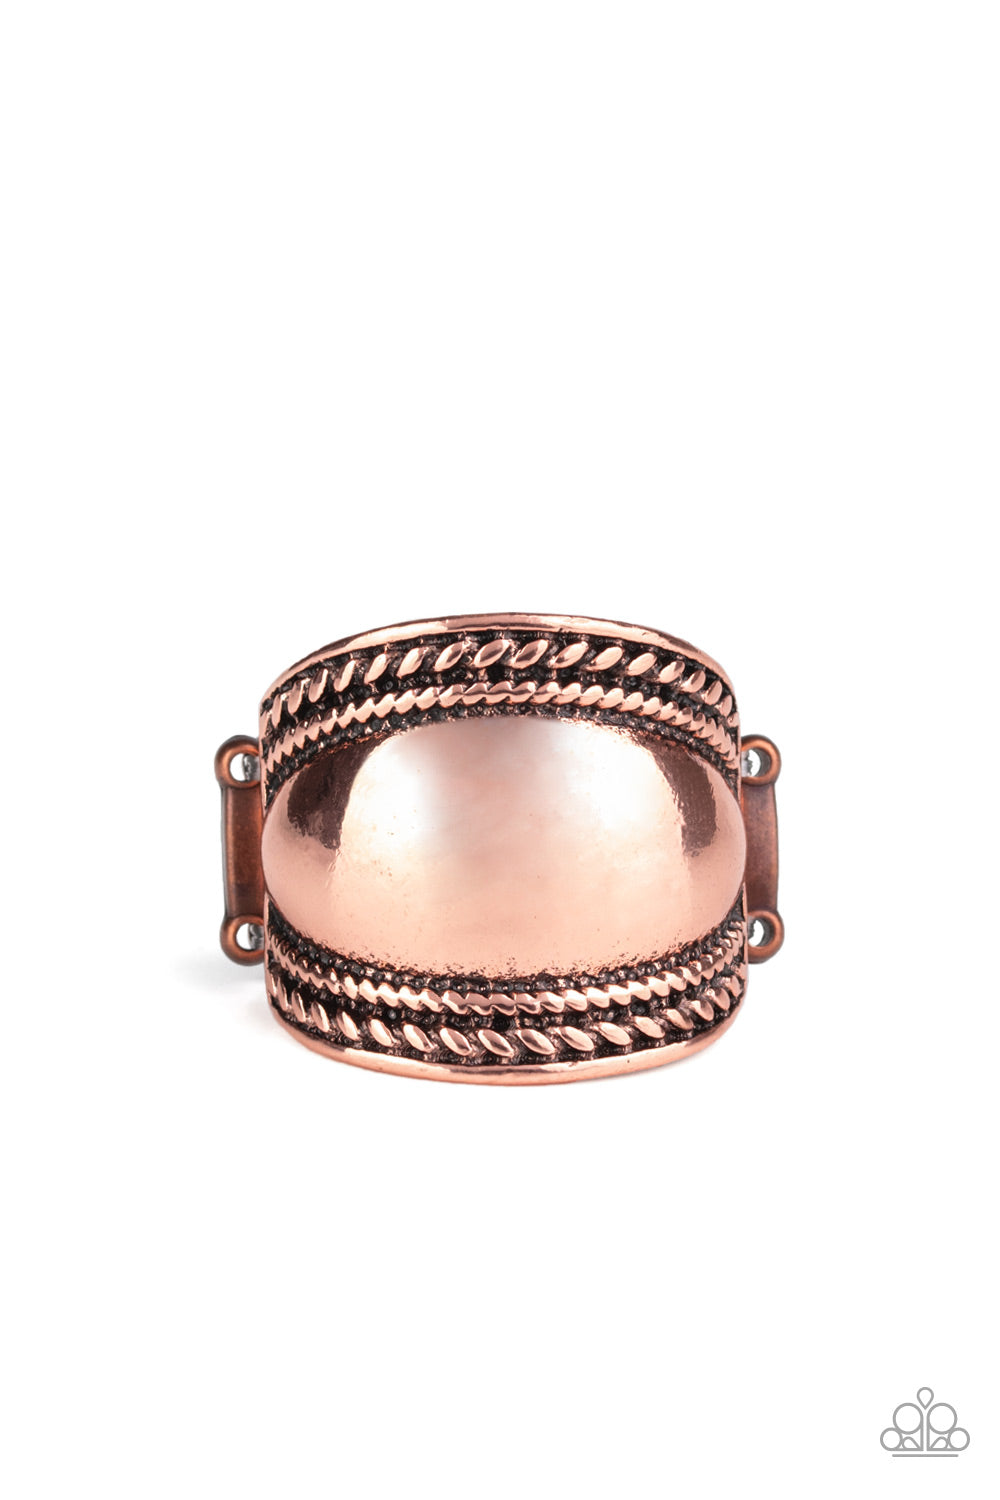 Bucking Trends - Copper Ring